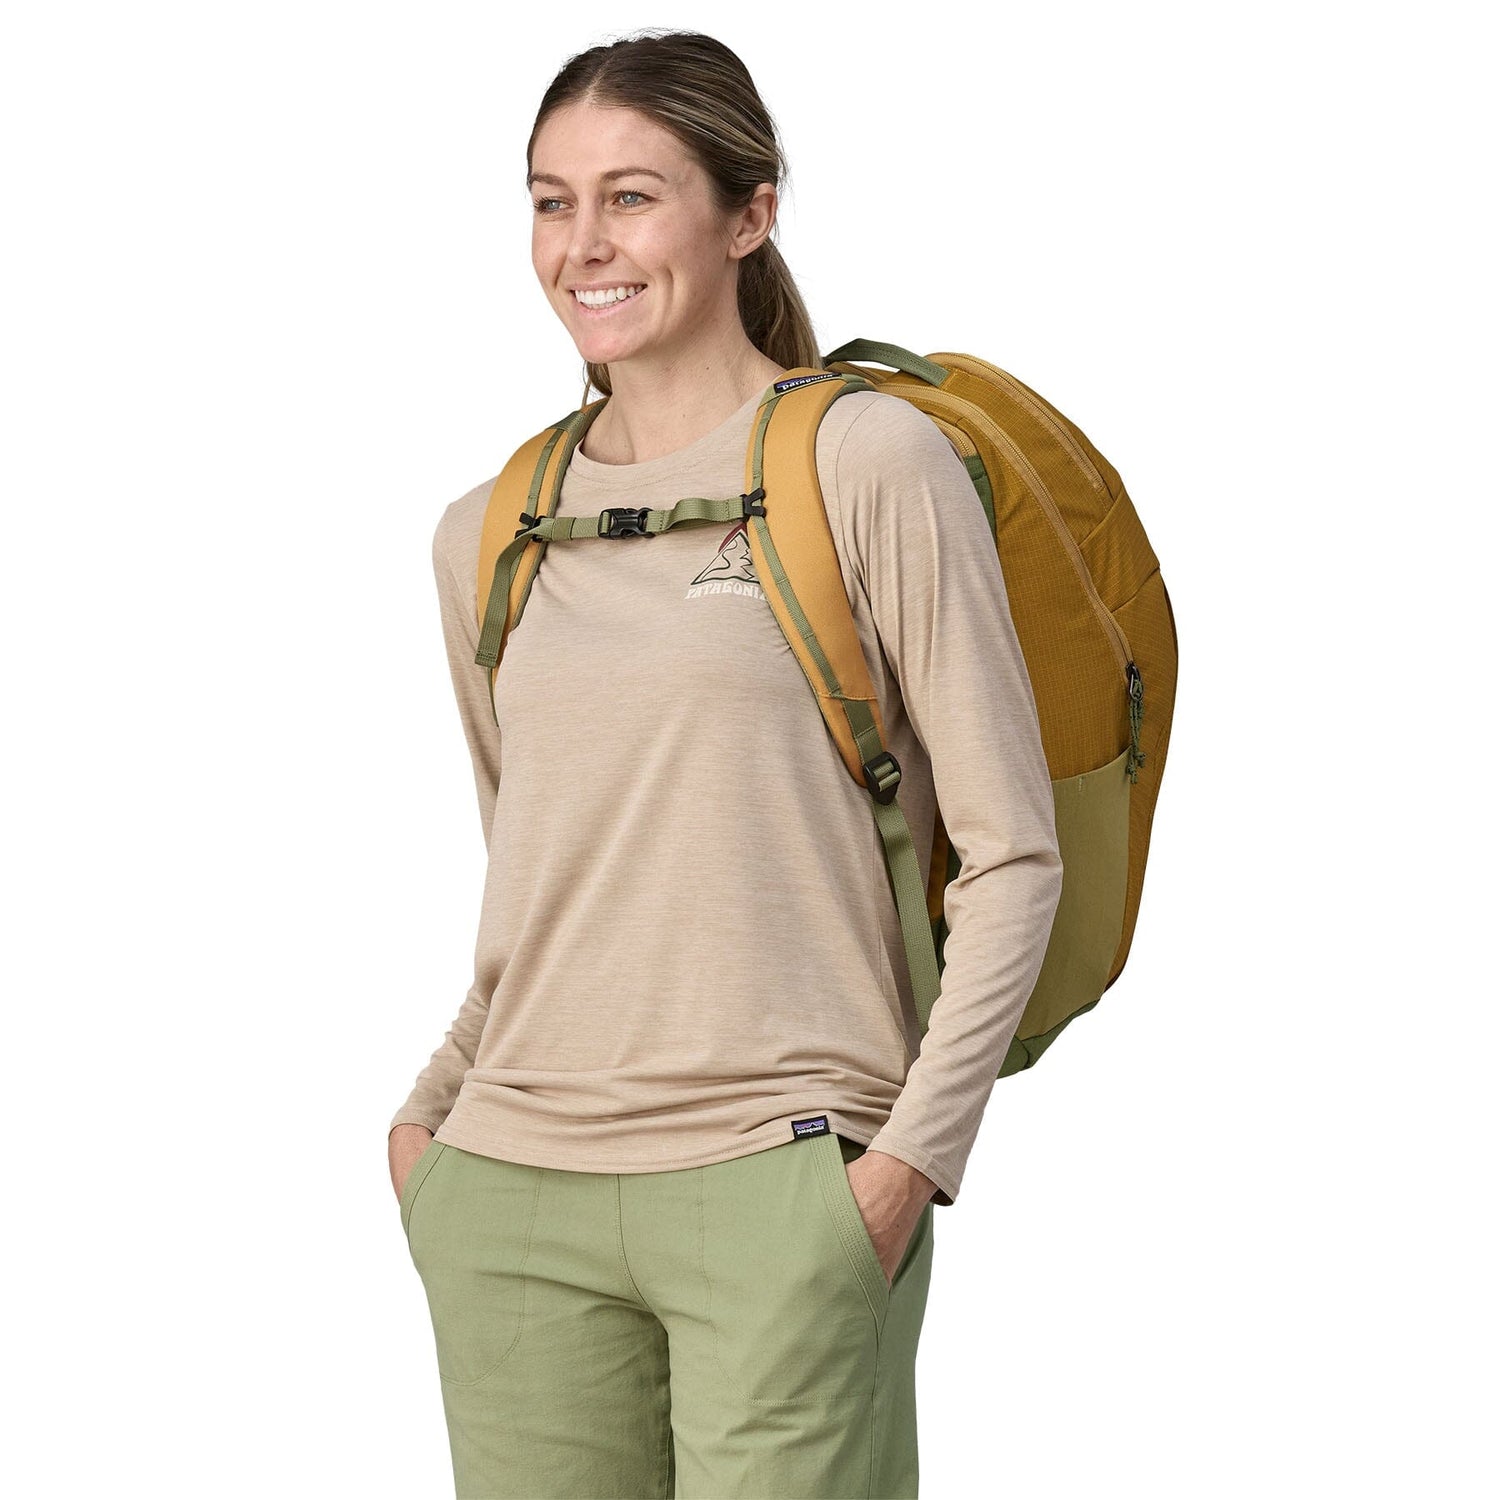 Patagonia Black Hole Pack 32L - 100% Recycled Polyester Pufferfish Gold Bags